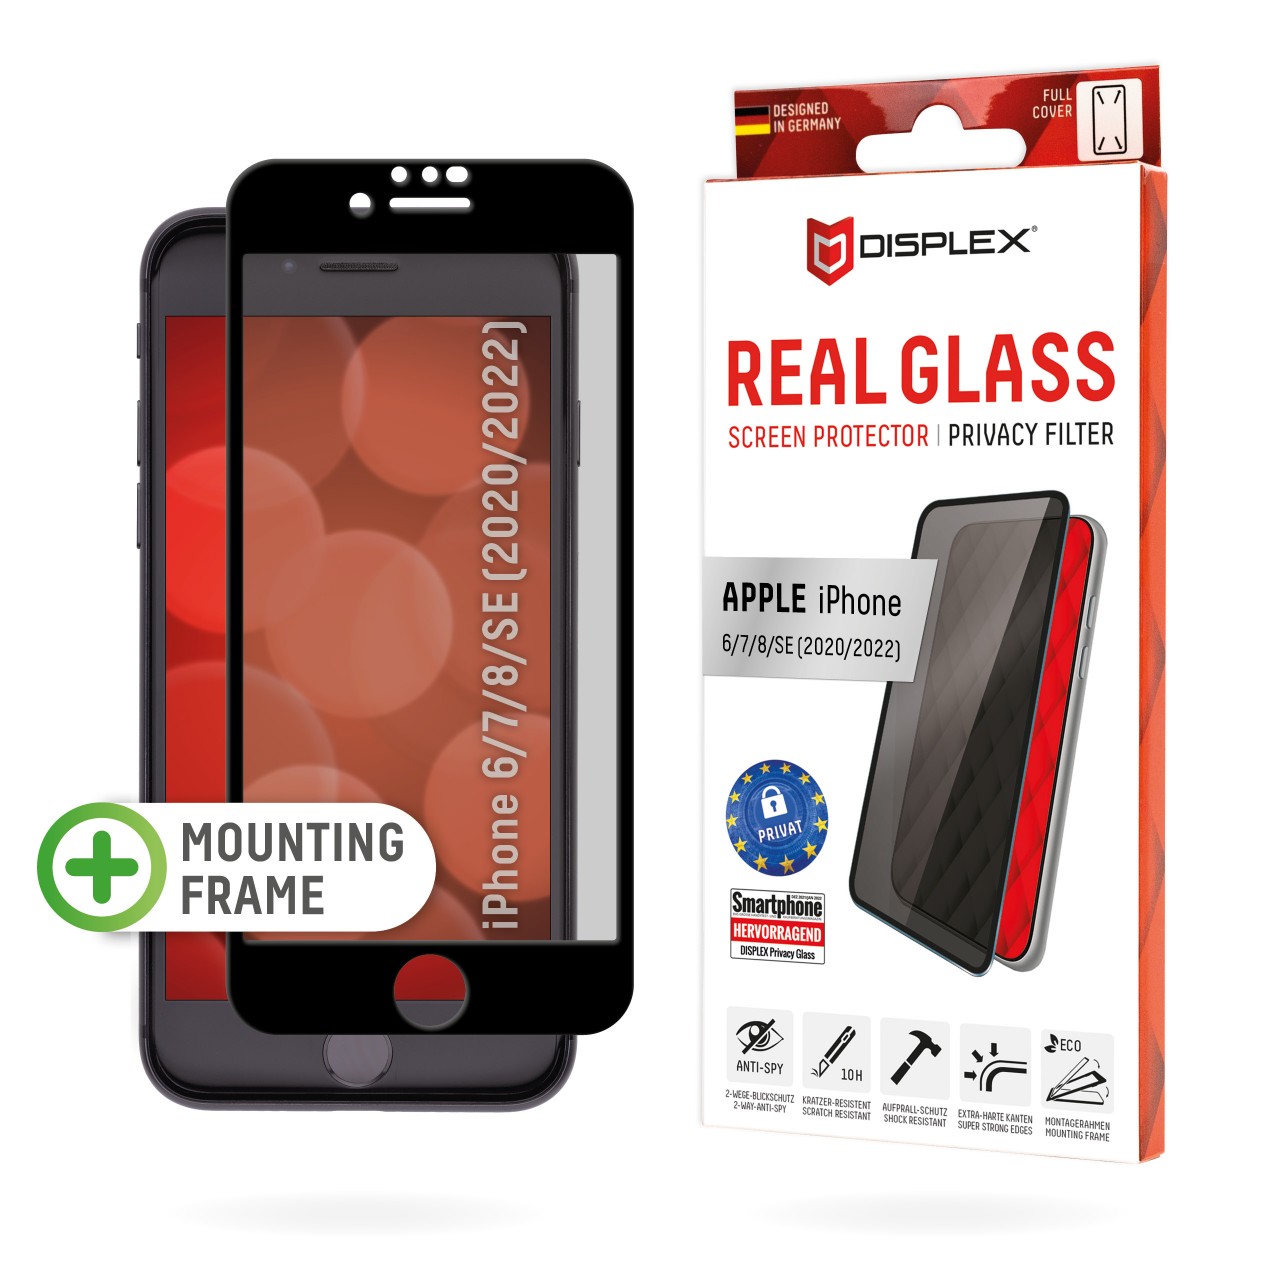 iPhone 6/7/8/SE (2020/2022) Privacy Screen Protector